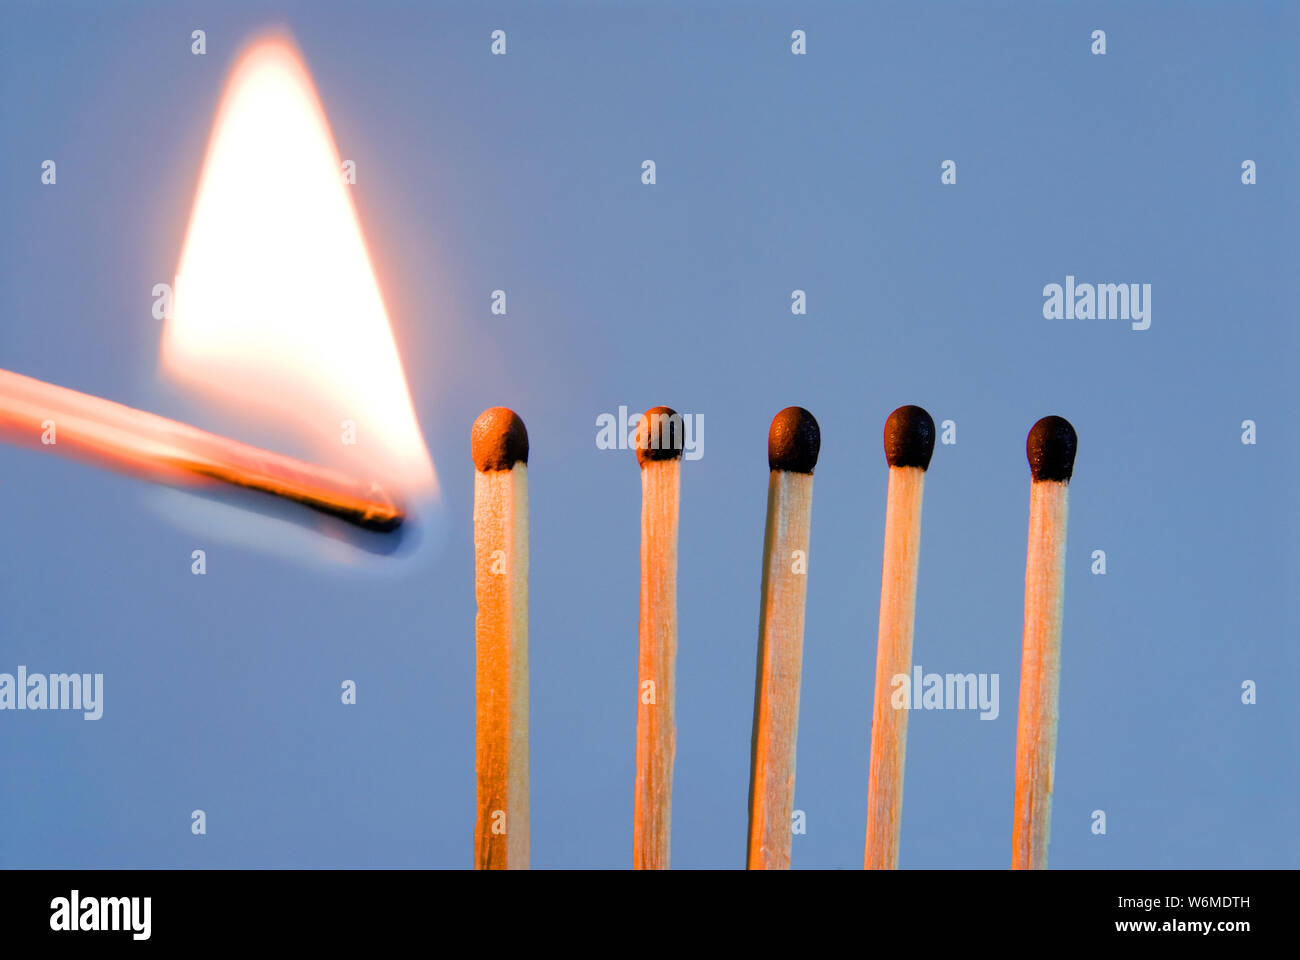 Setting on fire a line of matches Stock Photo